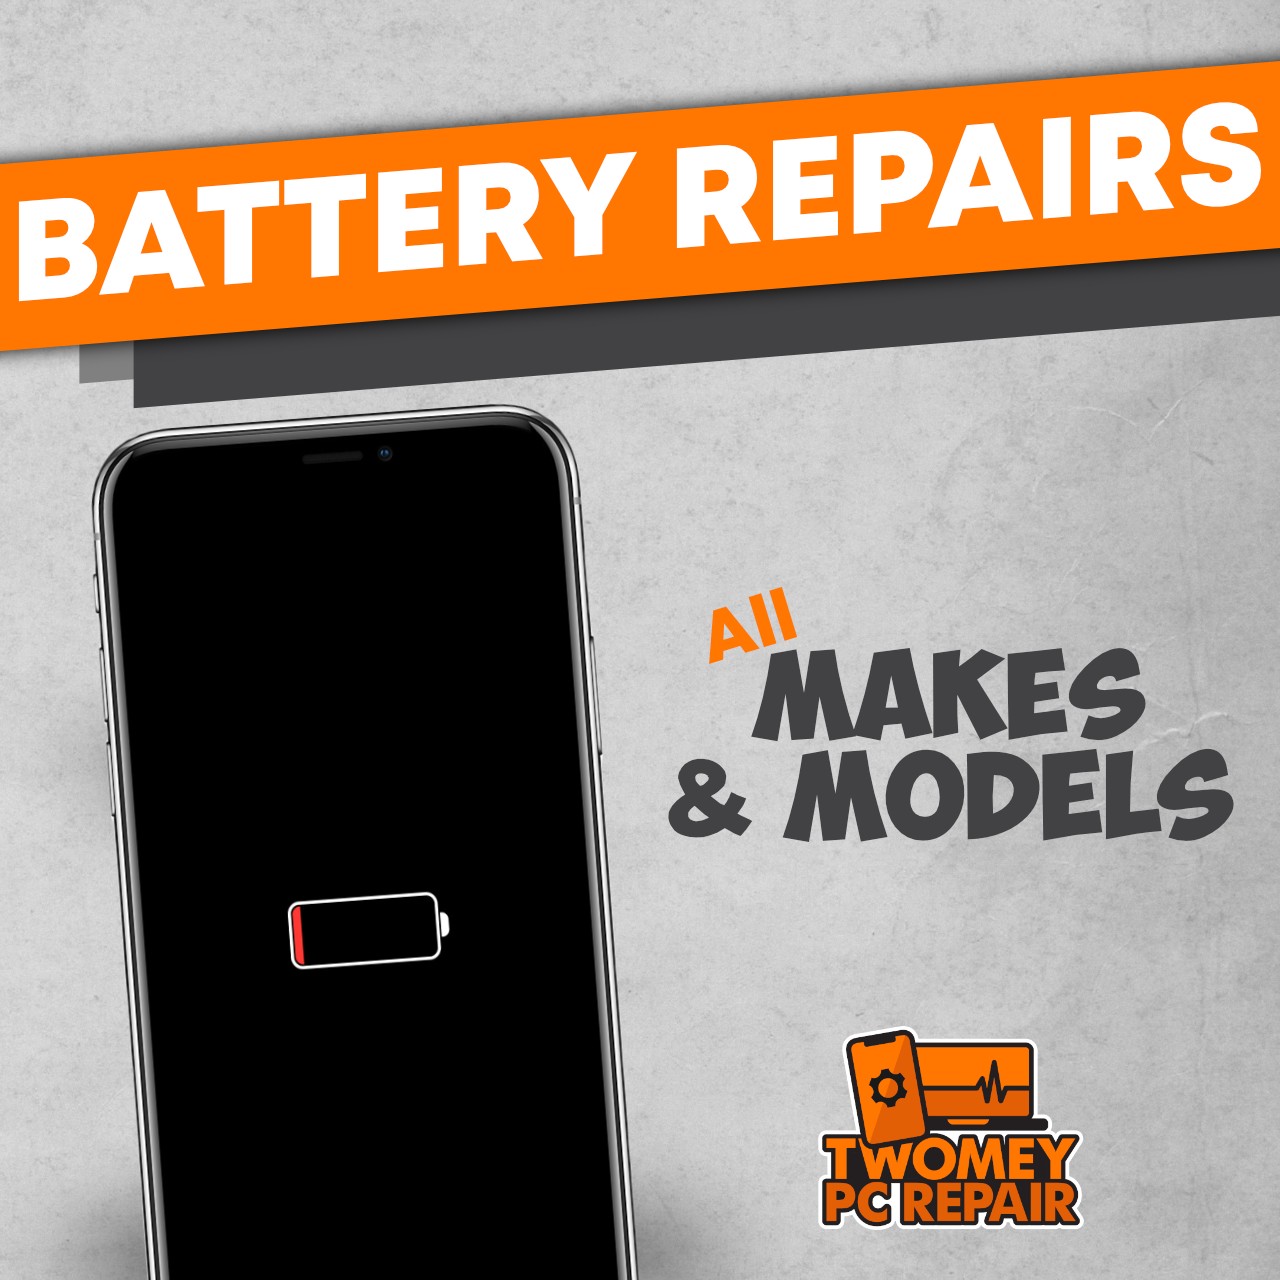 Battery Repair services are available for all makes and models. Whether you need a Battery Replacement or Cellphone Repair, we have got you covered.